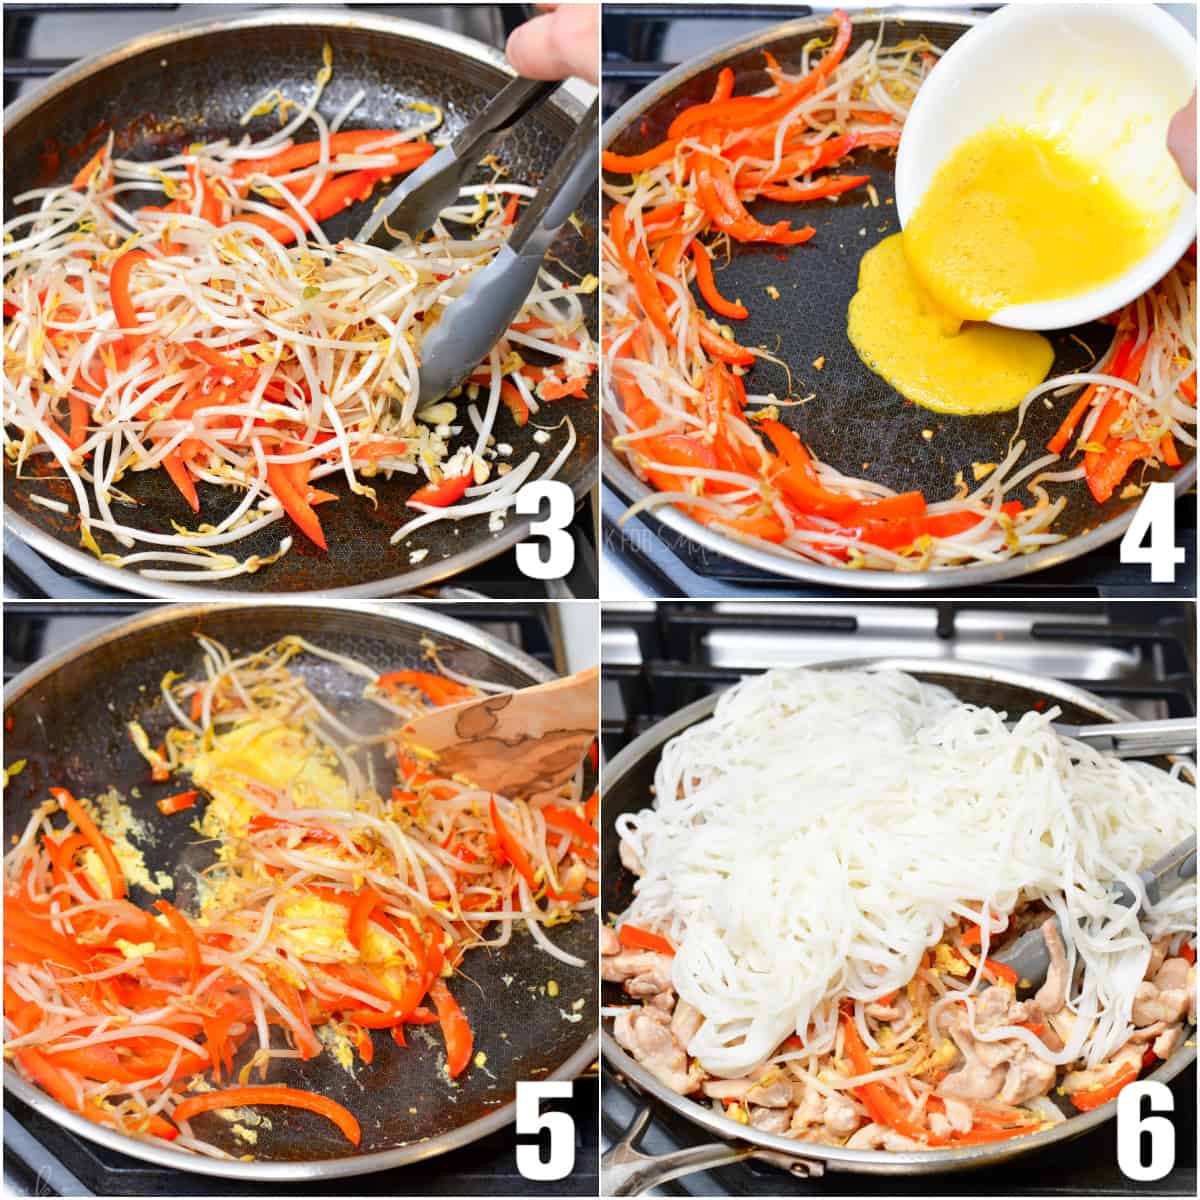 In the first photo, vegetables are being cooked in a skillet. In the second photo, eggs are being added to the center of the skillet. The third photo shows eggs being cooked with vegetables. The final photo shows noodles being added to the skillet. 